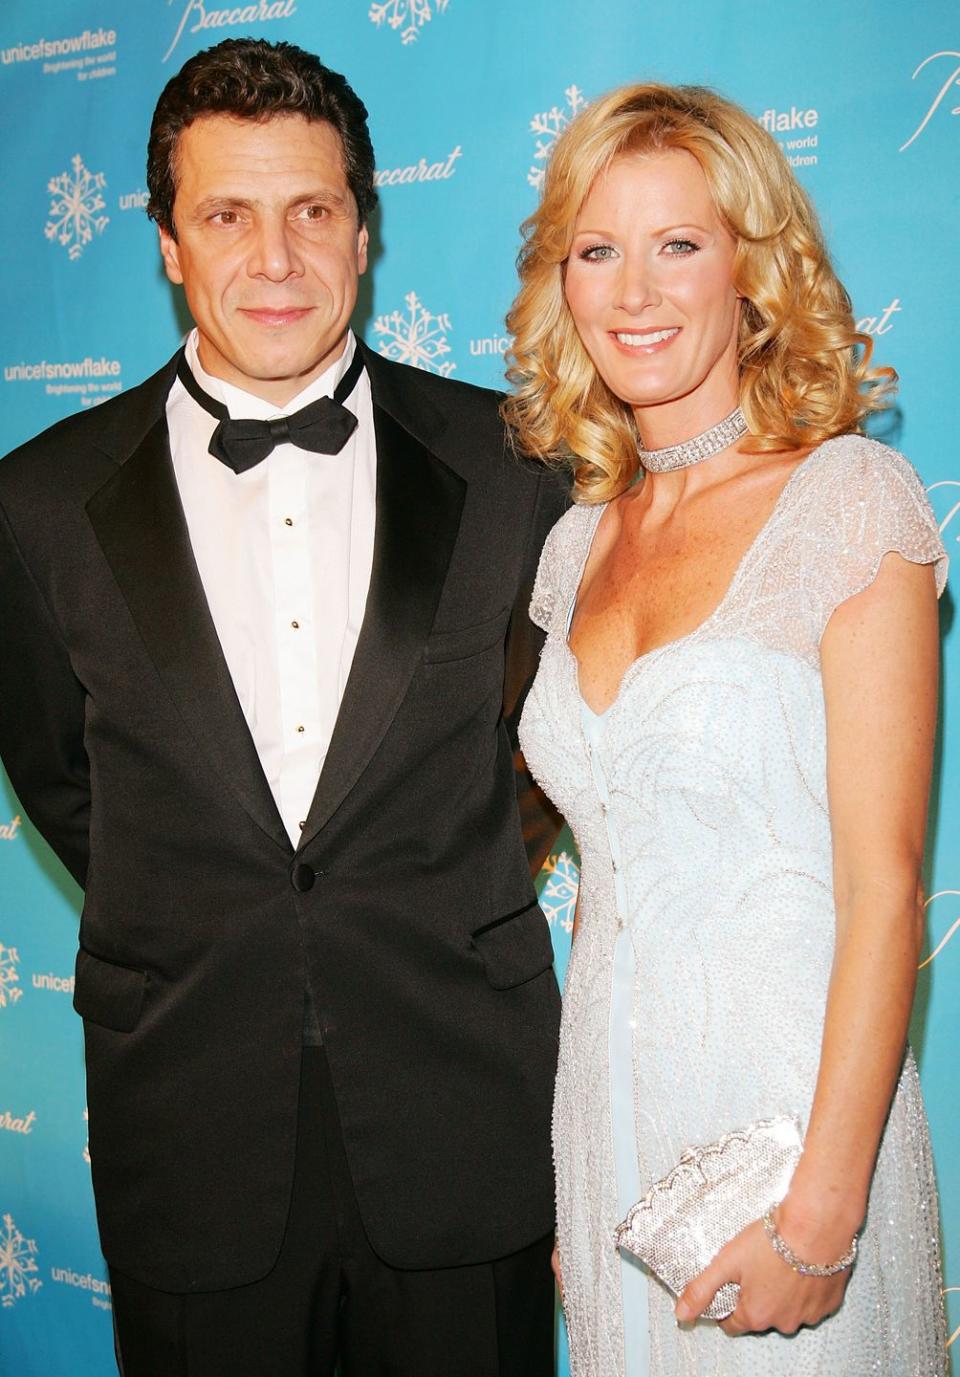 Andrew Cuomo and Sandra Lee met in 2005.